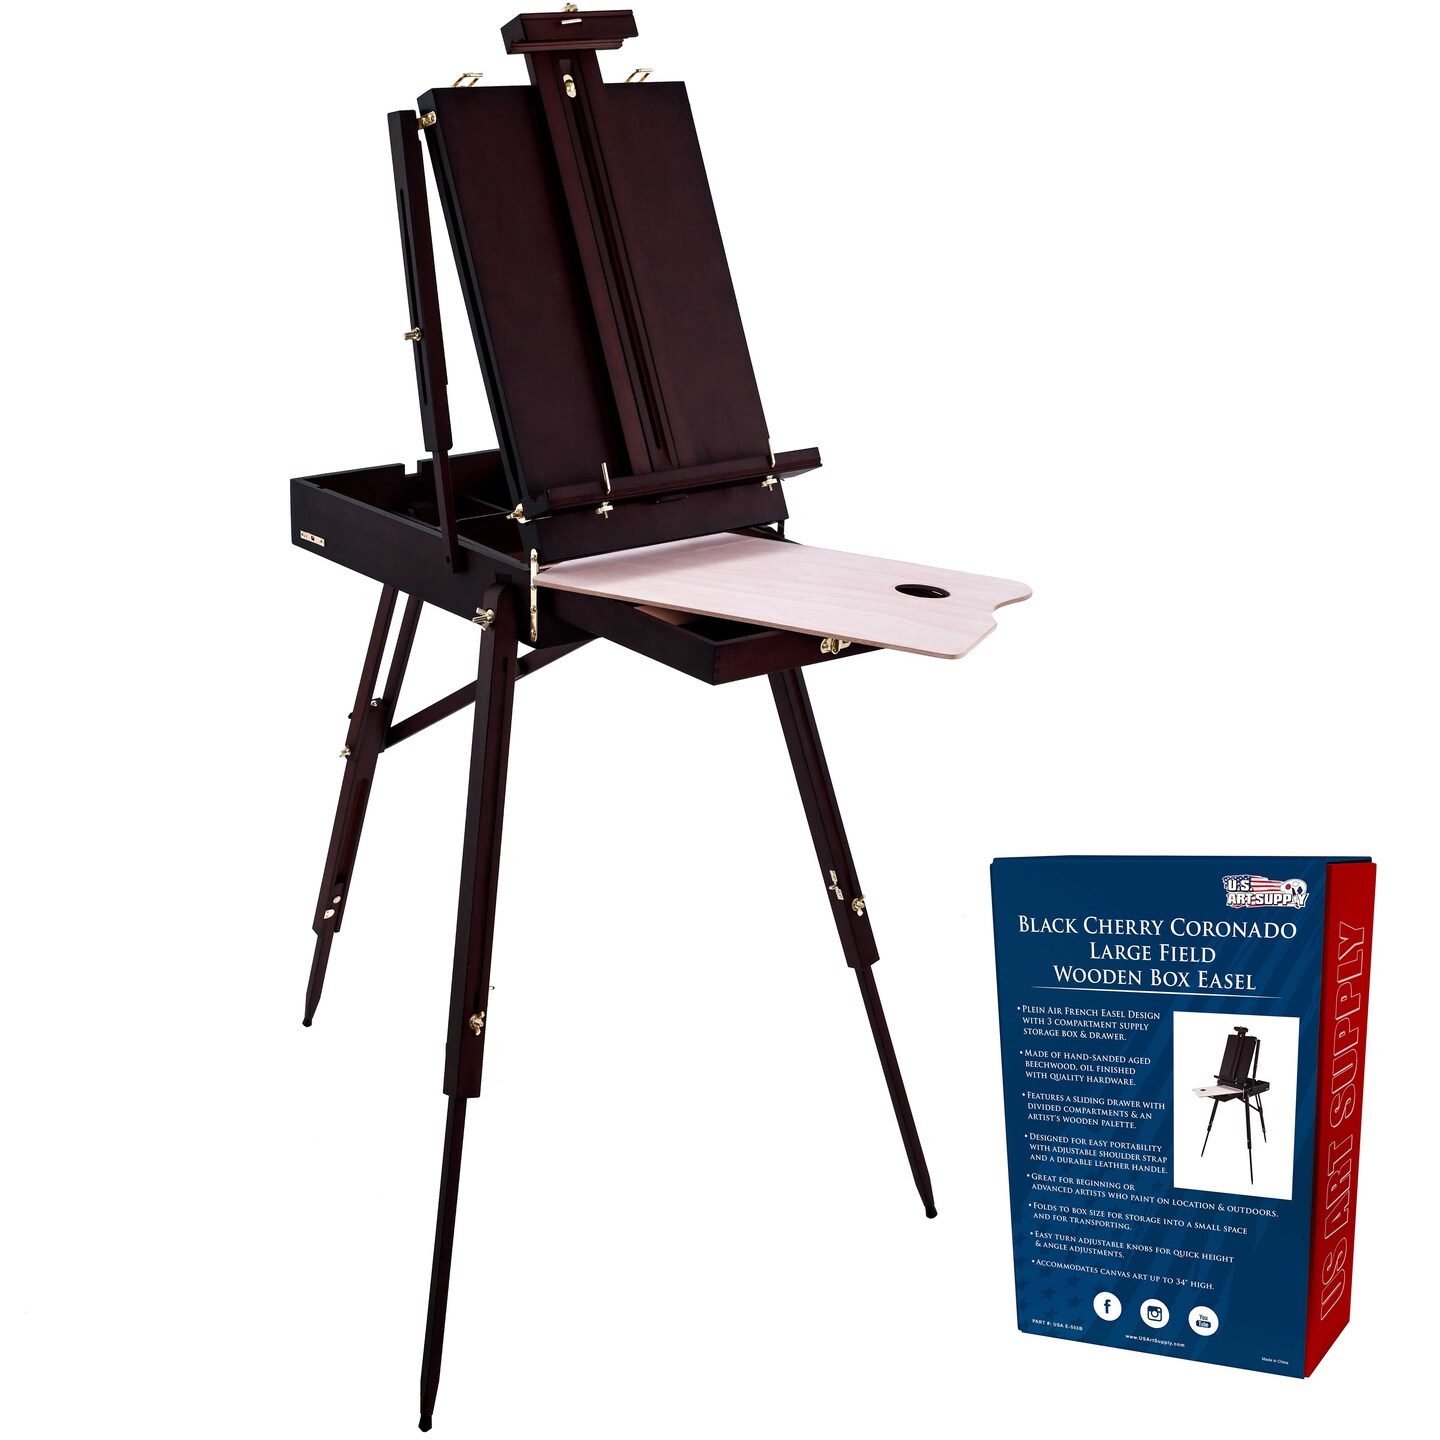  U.S. Art Supply Venice Heavy Duty Tabletop Wooden H-Frame  Studio Easel - Artists Adjustable Beechwood Painting and Display Easel,  Holds Up to 23 Canvas, Portable Sturdy Table Desktop Holder Stand